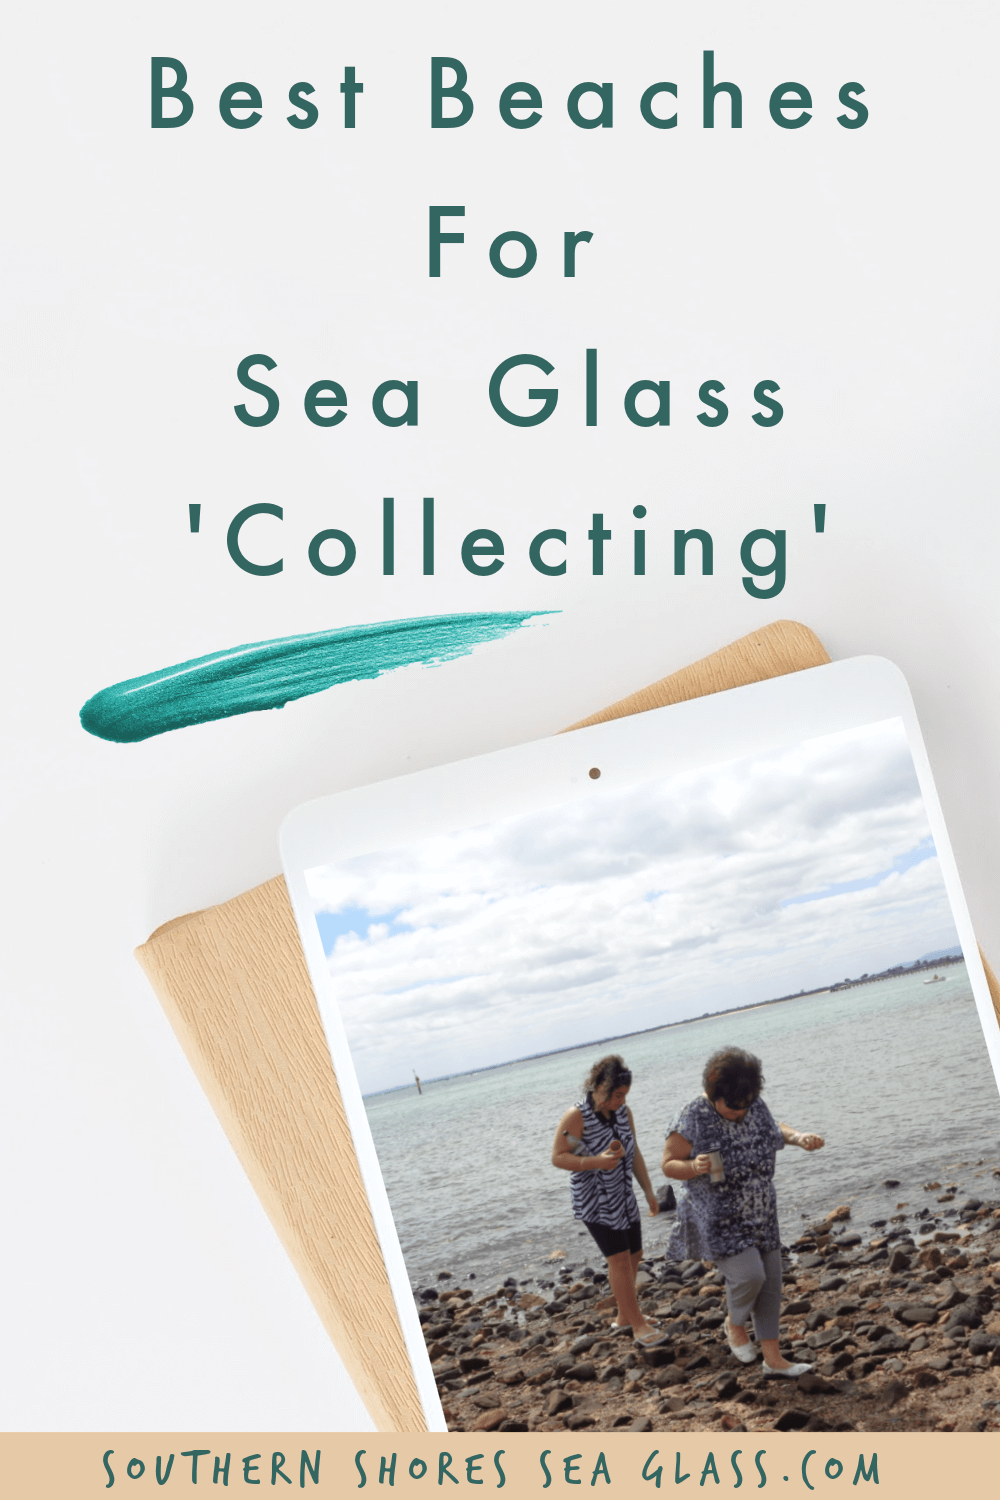 Finding the best beaches for sea glass collecting needn't be difficult if you know what to look for. Here are a few tips on what to look for and why.